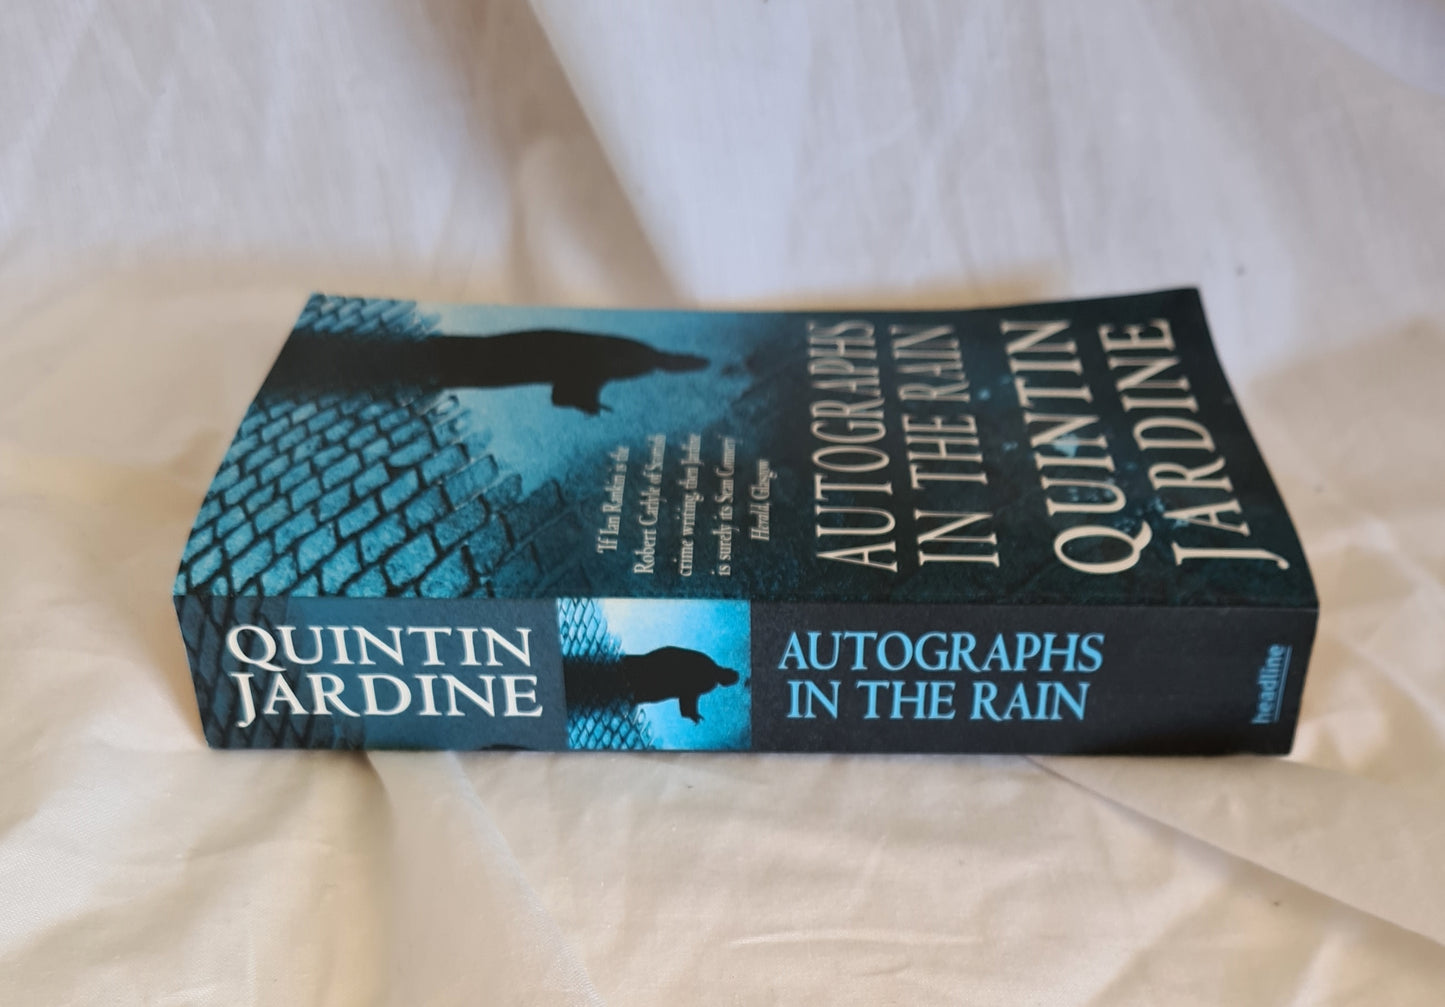 Autographs in the Rain by Quintin Jardine